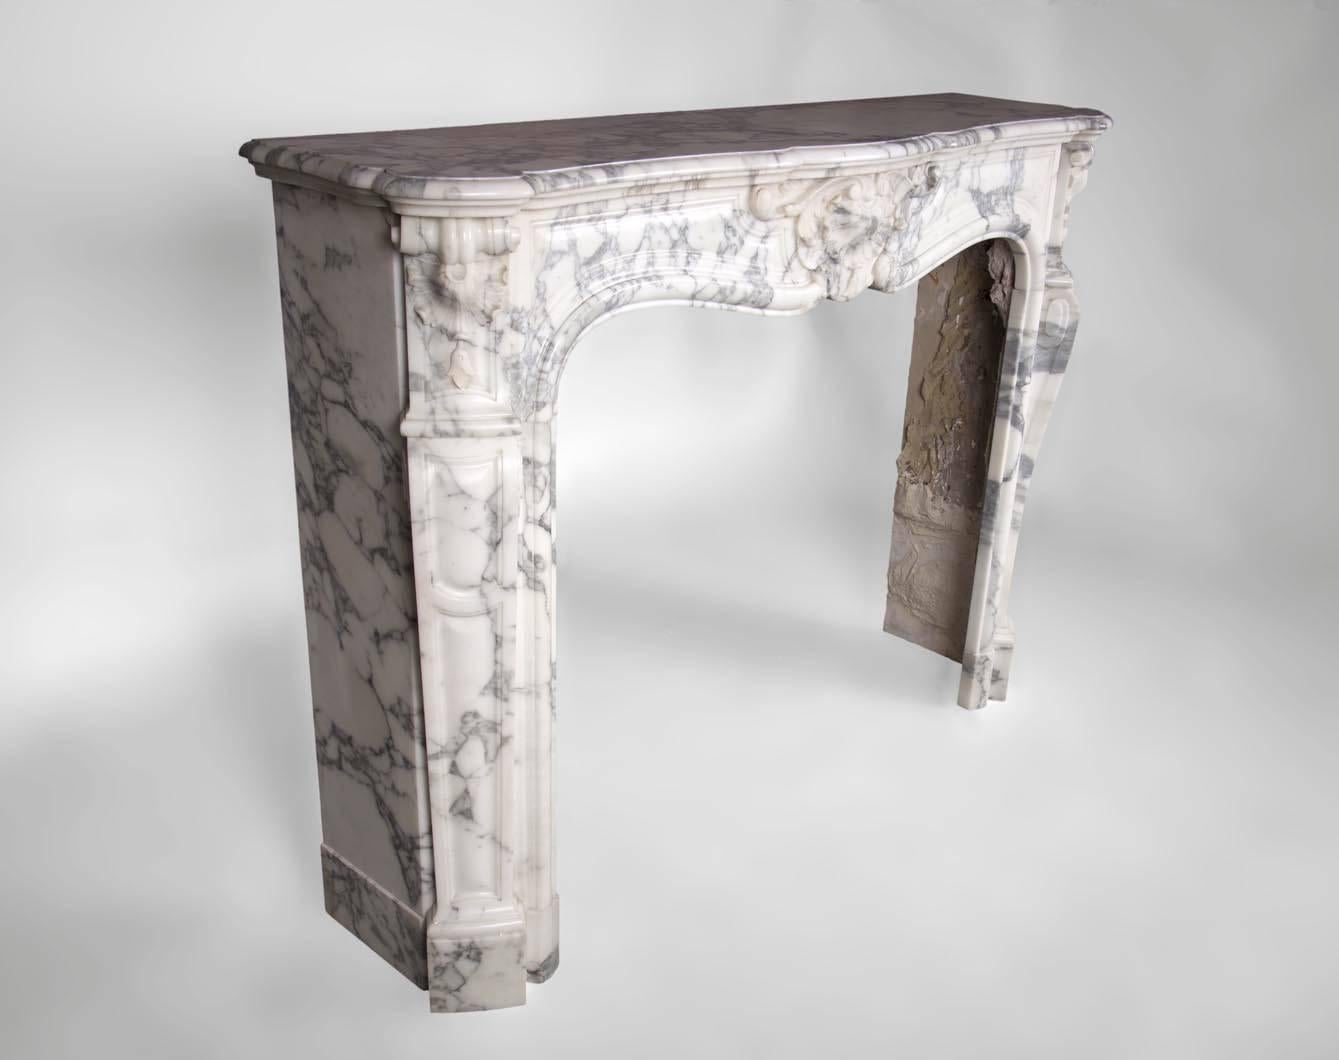 19th Century Antique Louis XV Style Fireplace with Three Shells in Arabescato Marble